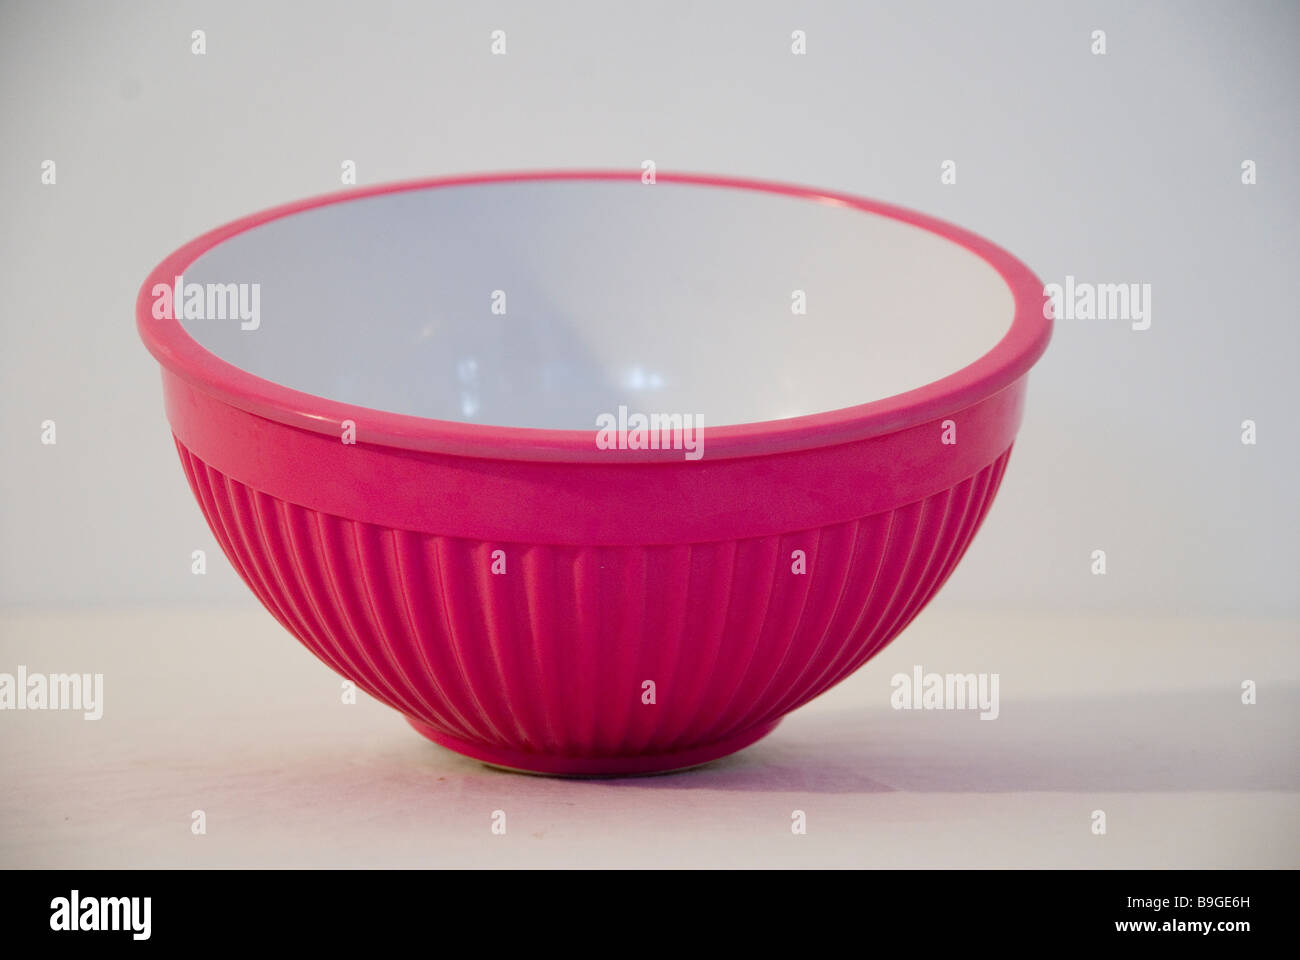 Pink and white food mixing bowl on a white background with soft shadow Stock Photo